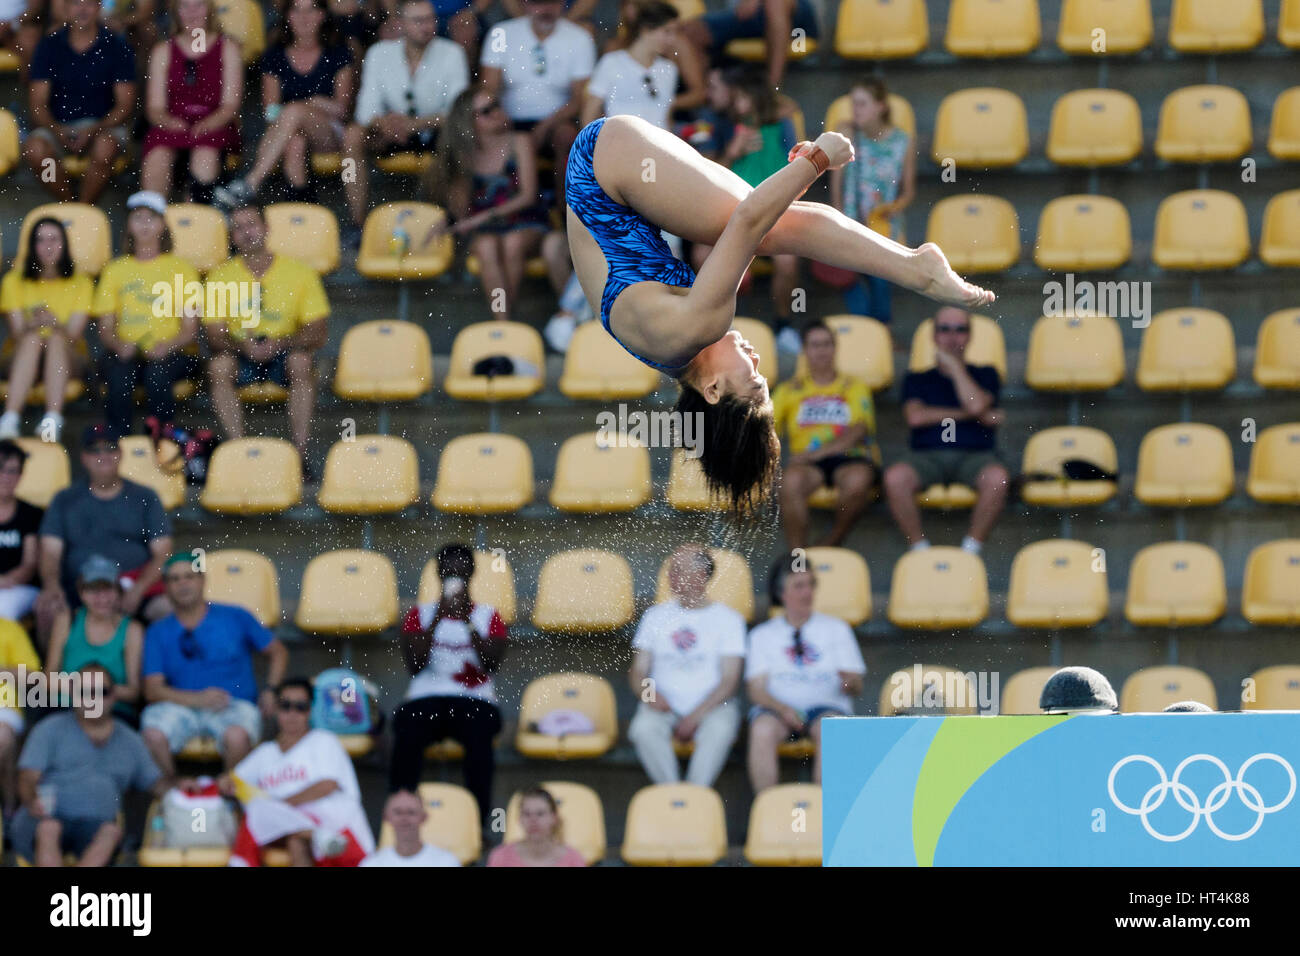 Rio de Janeiro, Brazil. 18 August 2016 Nur Dhabitah Sabri  (MAS) competes in the Women Diving Platform 10m preliminary at the 2016 Olympic Summer Game Stock Photo